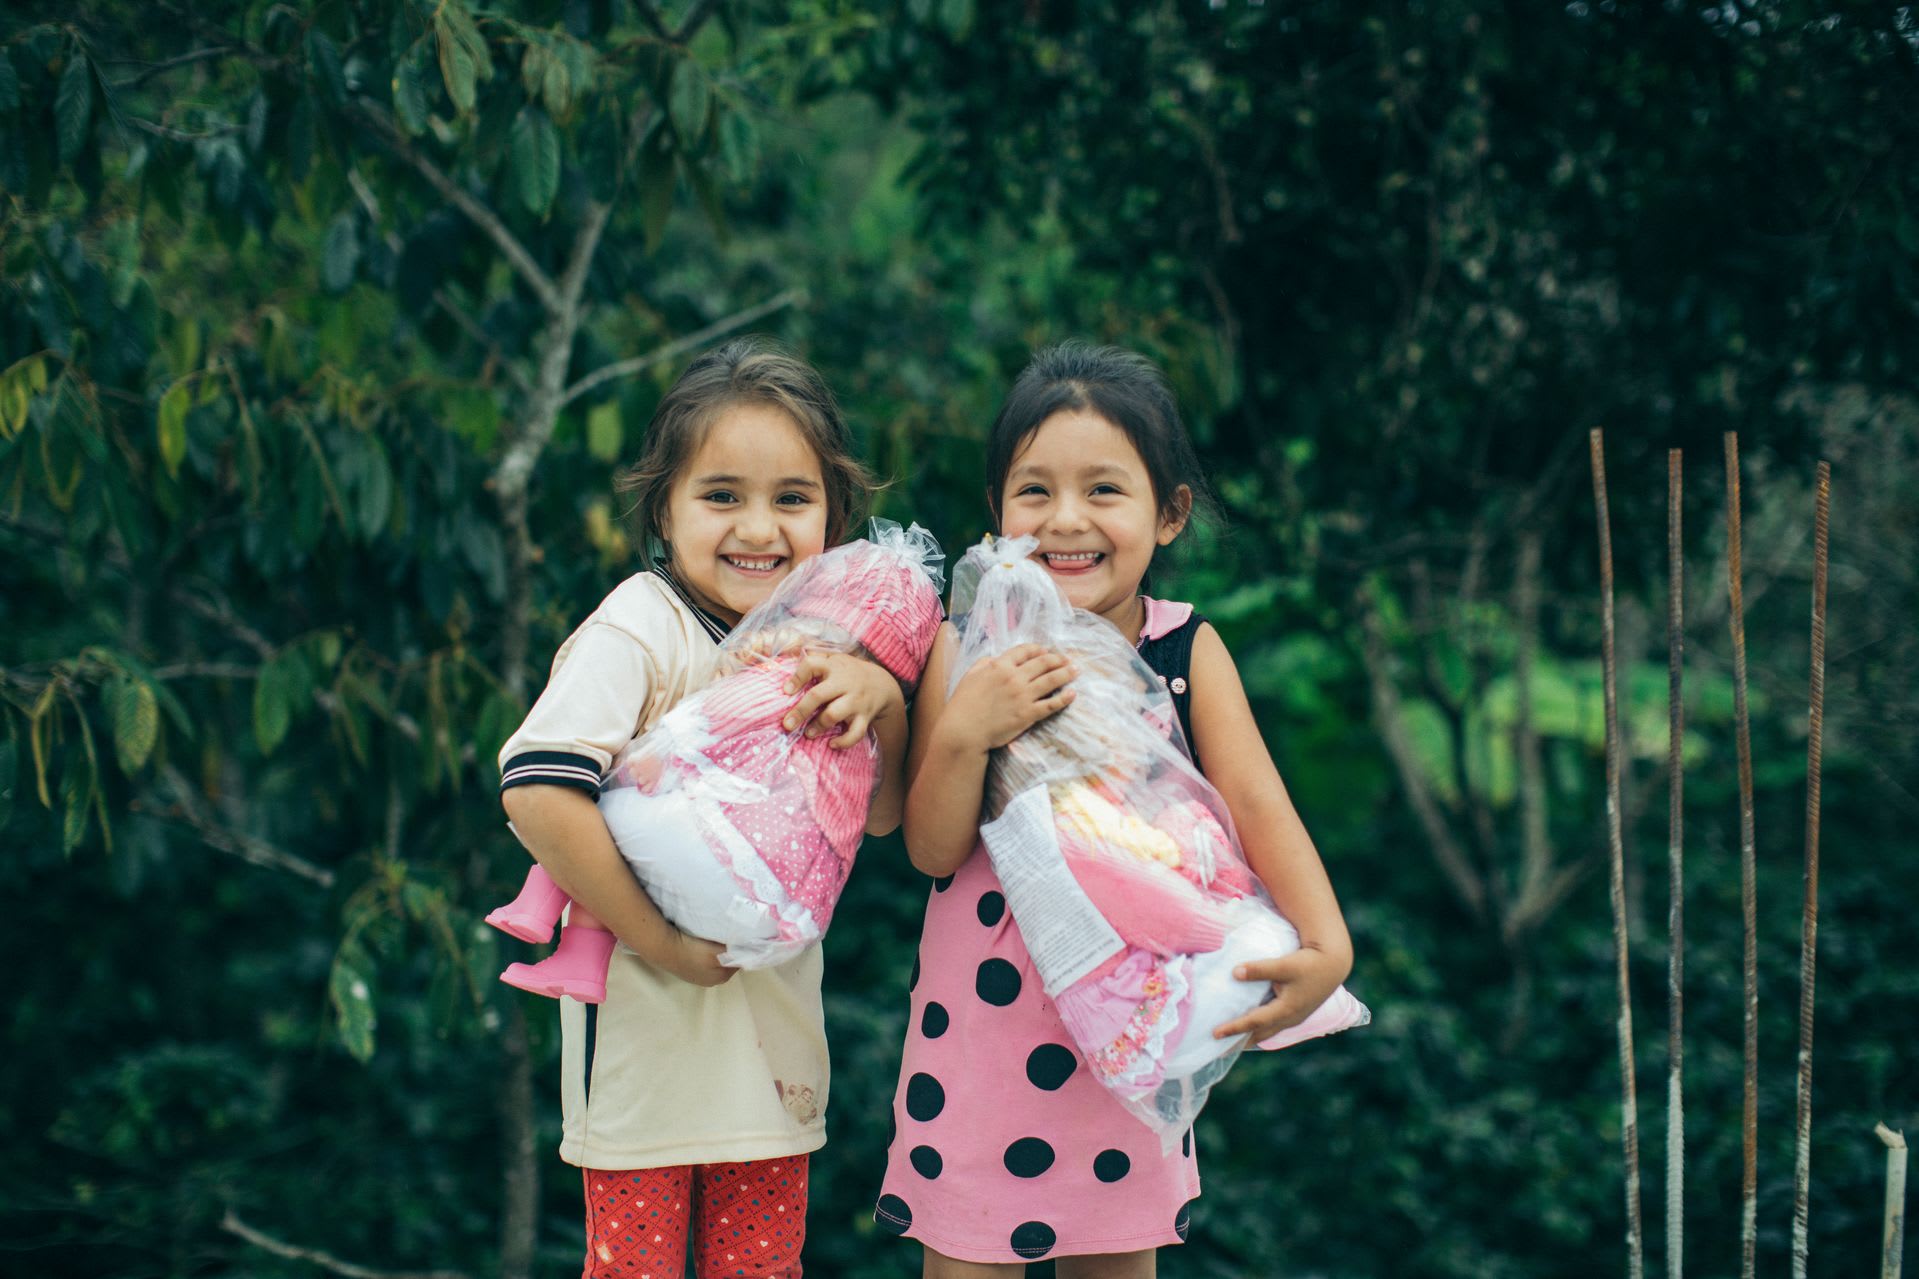 Two little girls are holding new dolls. They are smiling big with trees in the background.